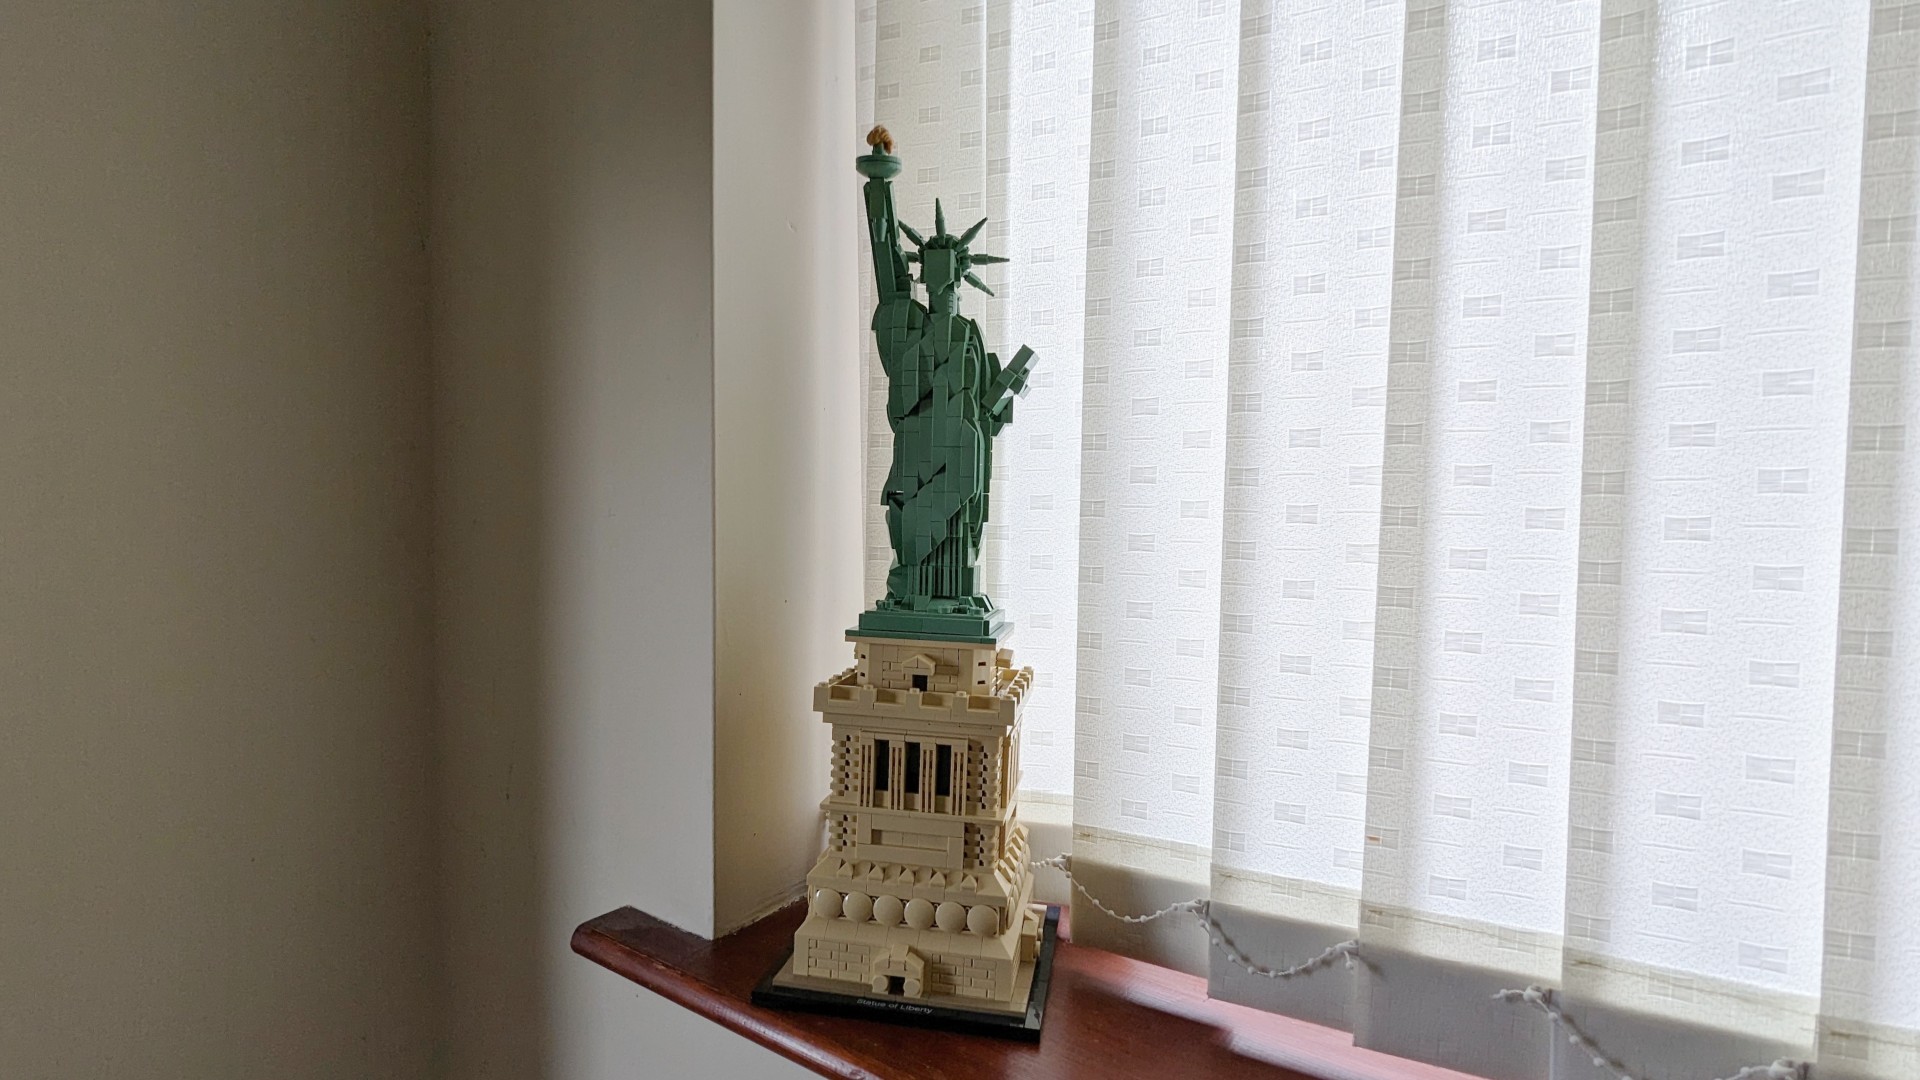 Lego Architecture Statue of Liberty 21042 - full statue in front of curtains.